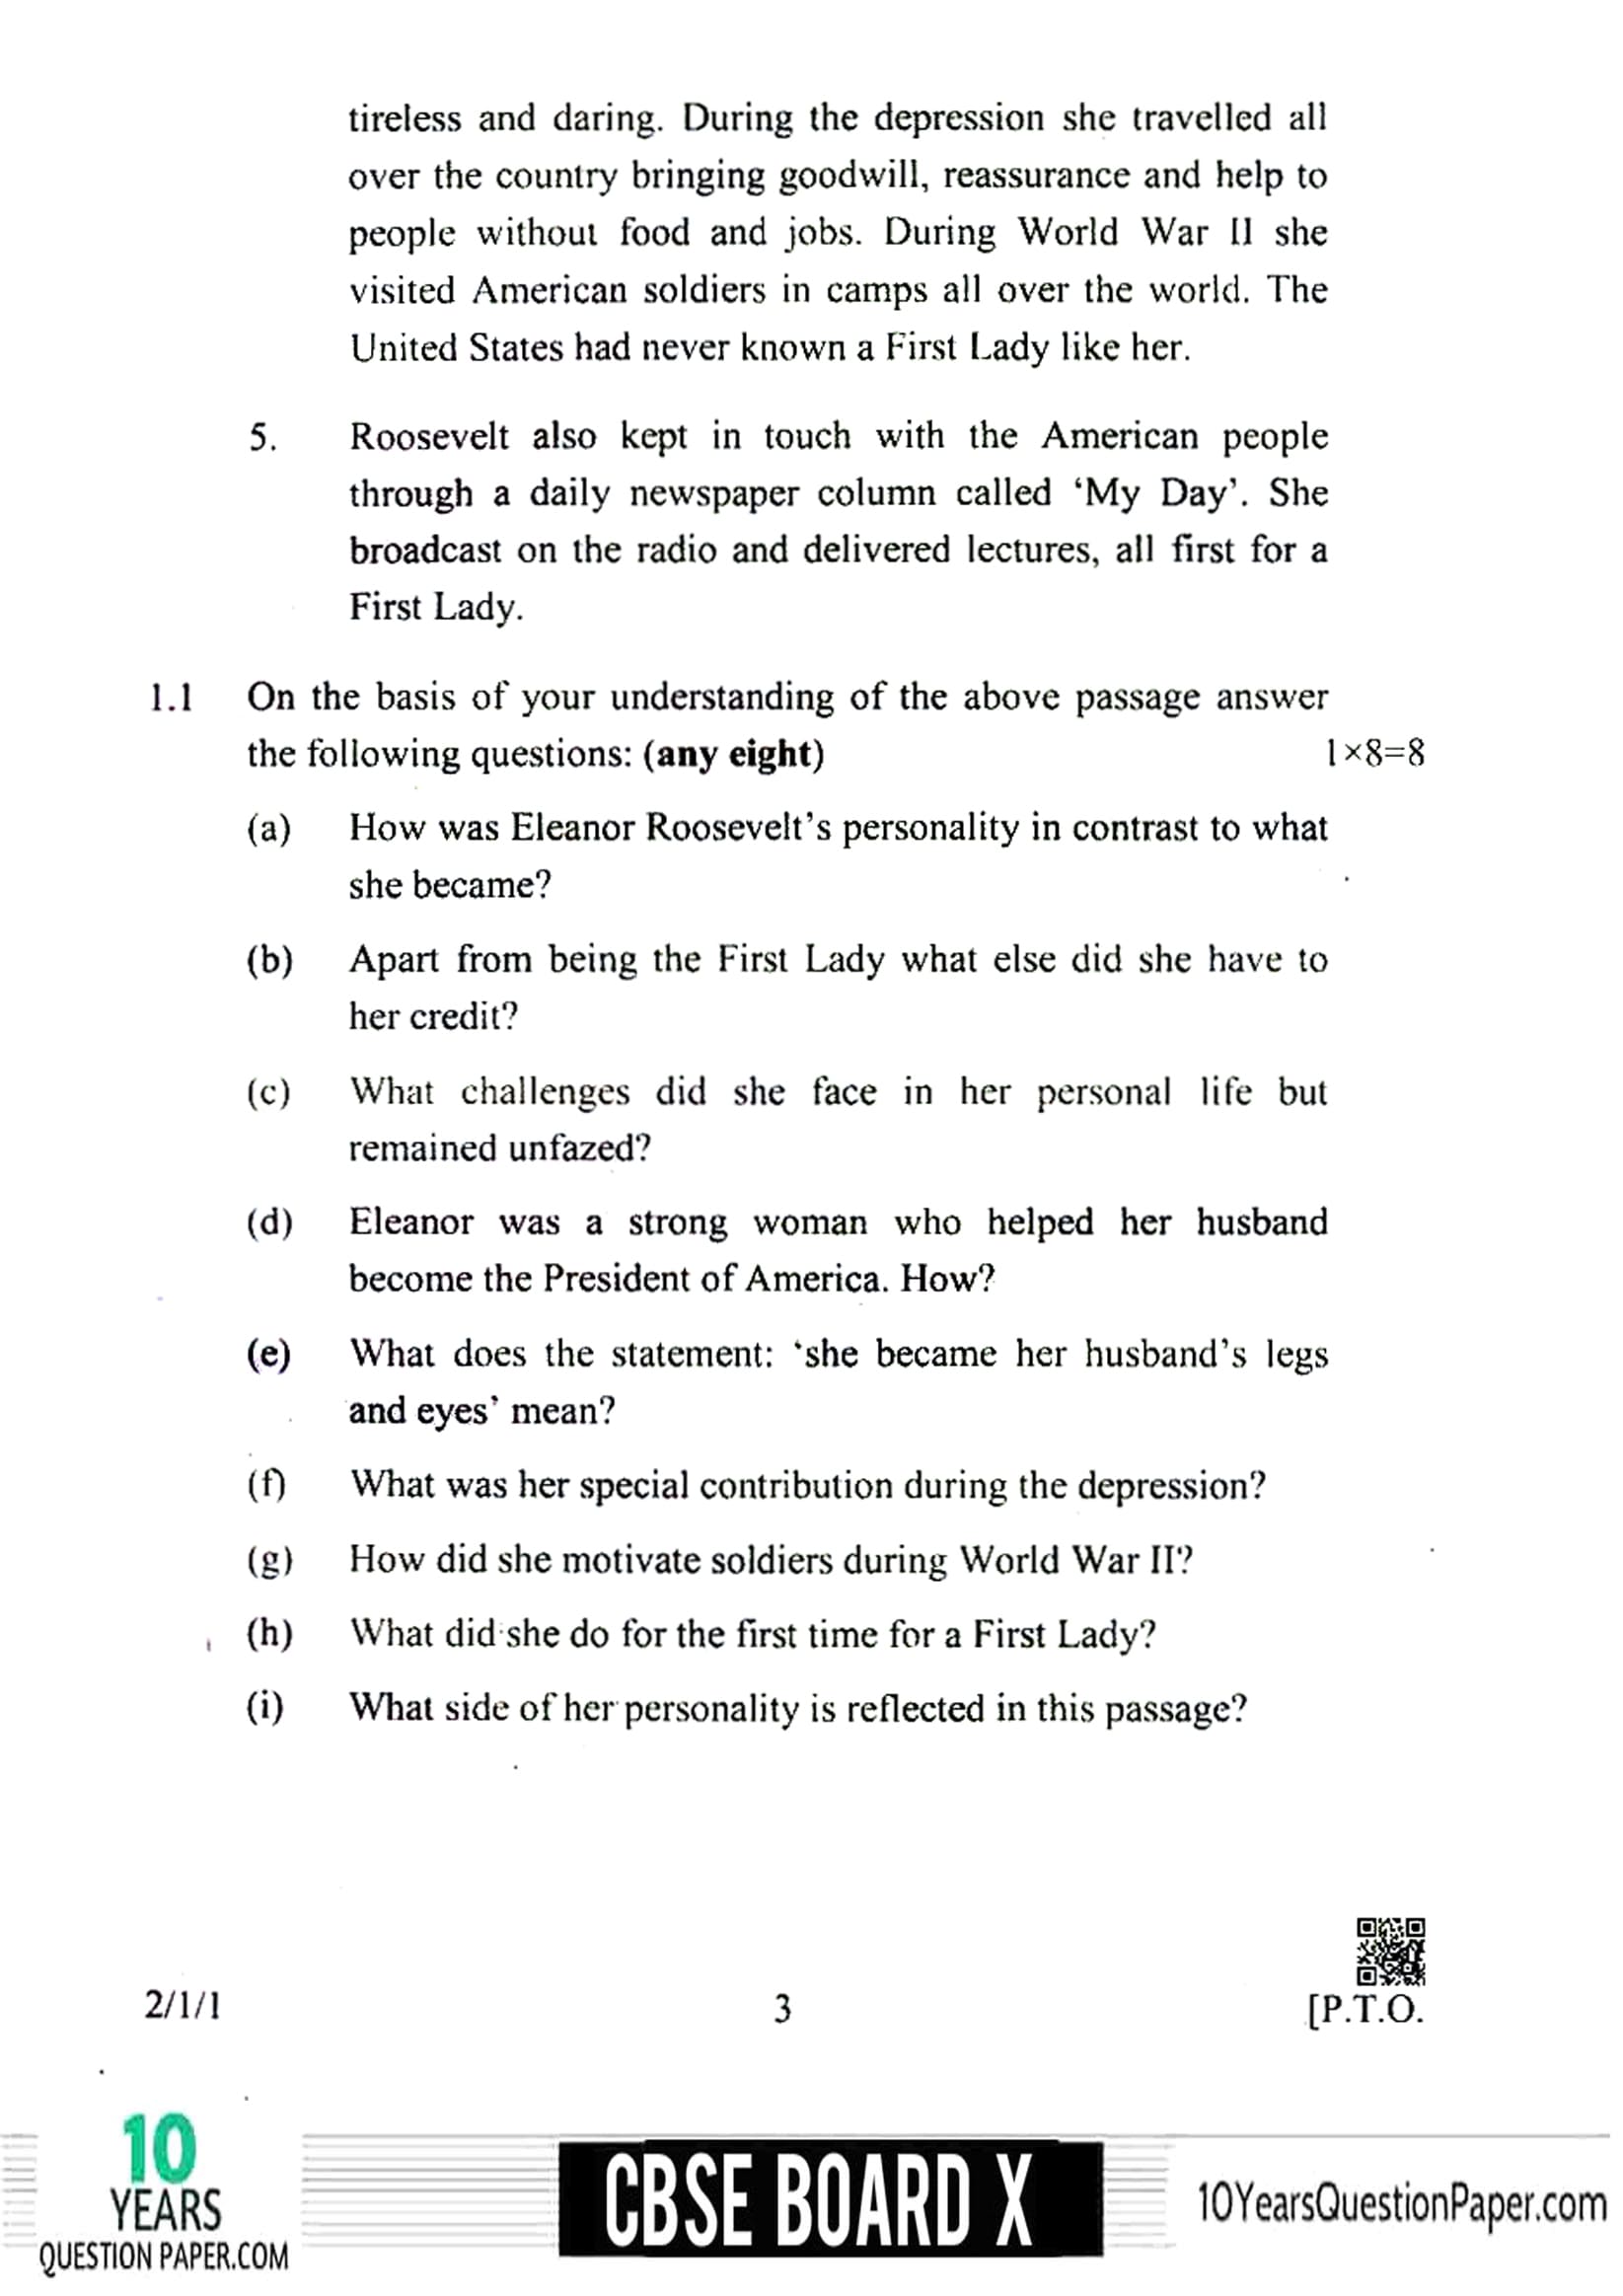 CBSE Class 10 English (Language And Literature) 2019 Question Paper